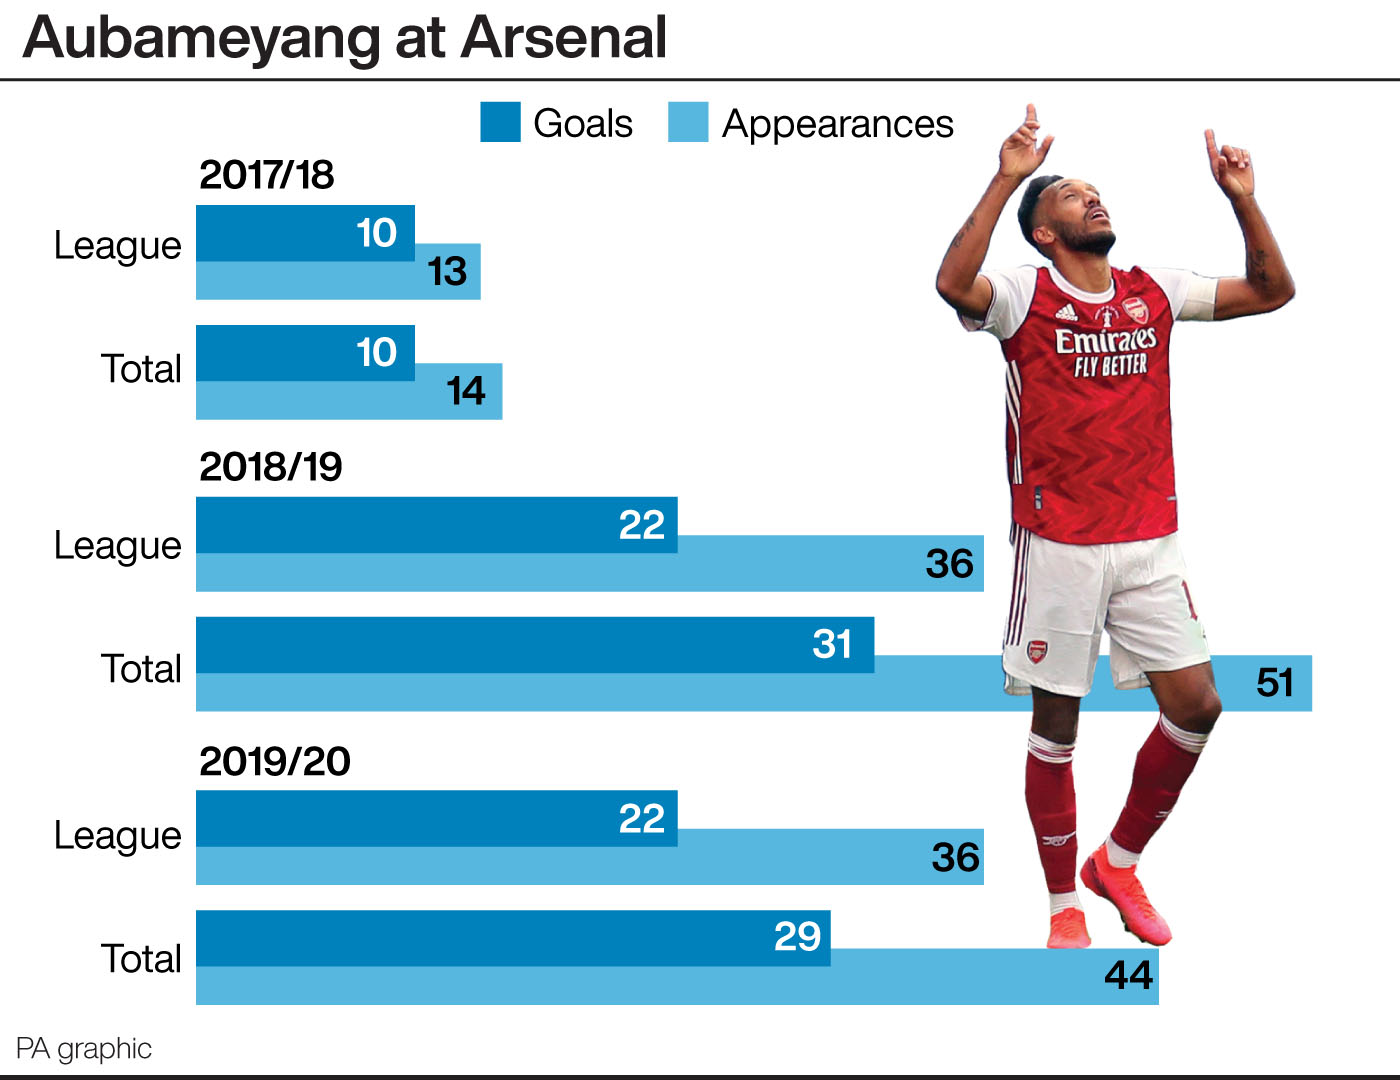 Pierre-Emerick Aubameyang's scoring record in first three campaigns for Arsenal